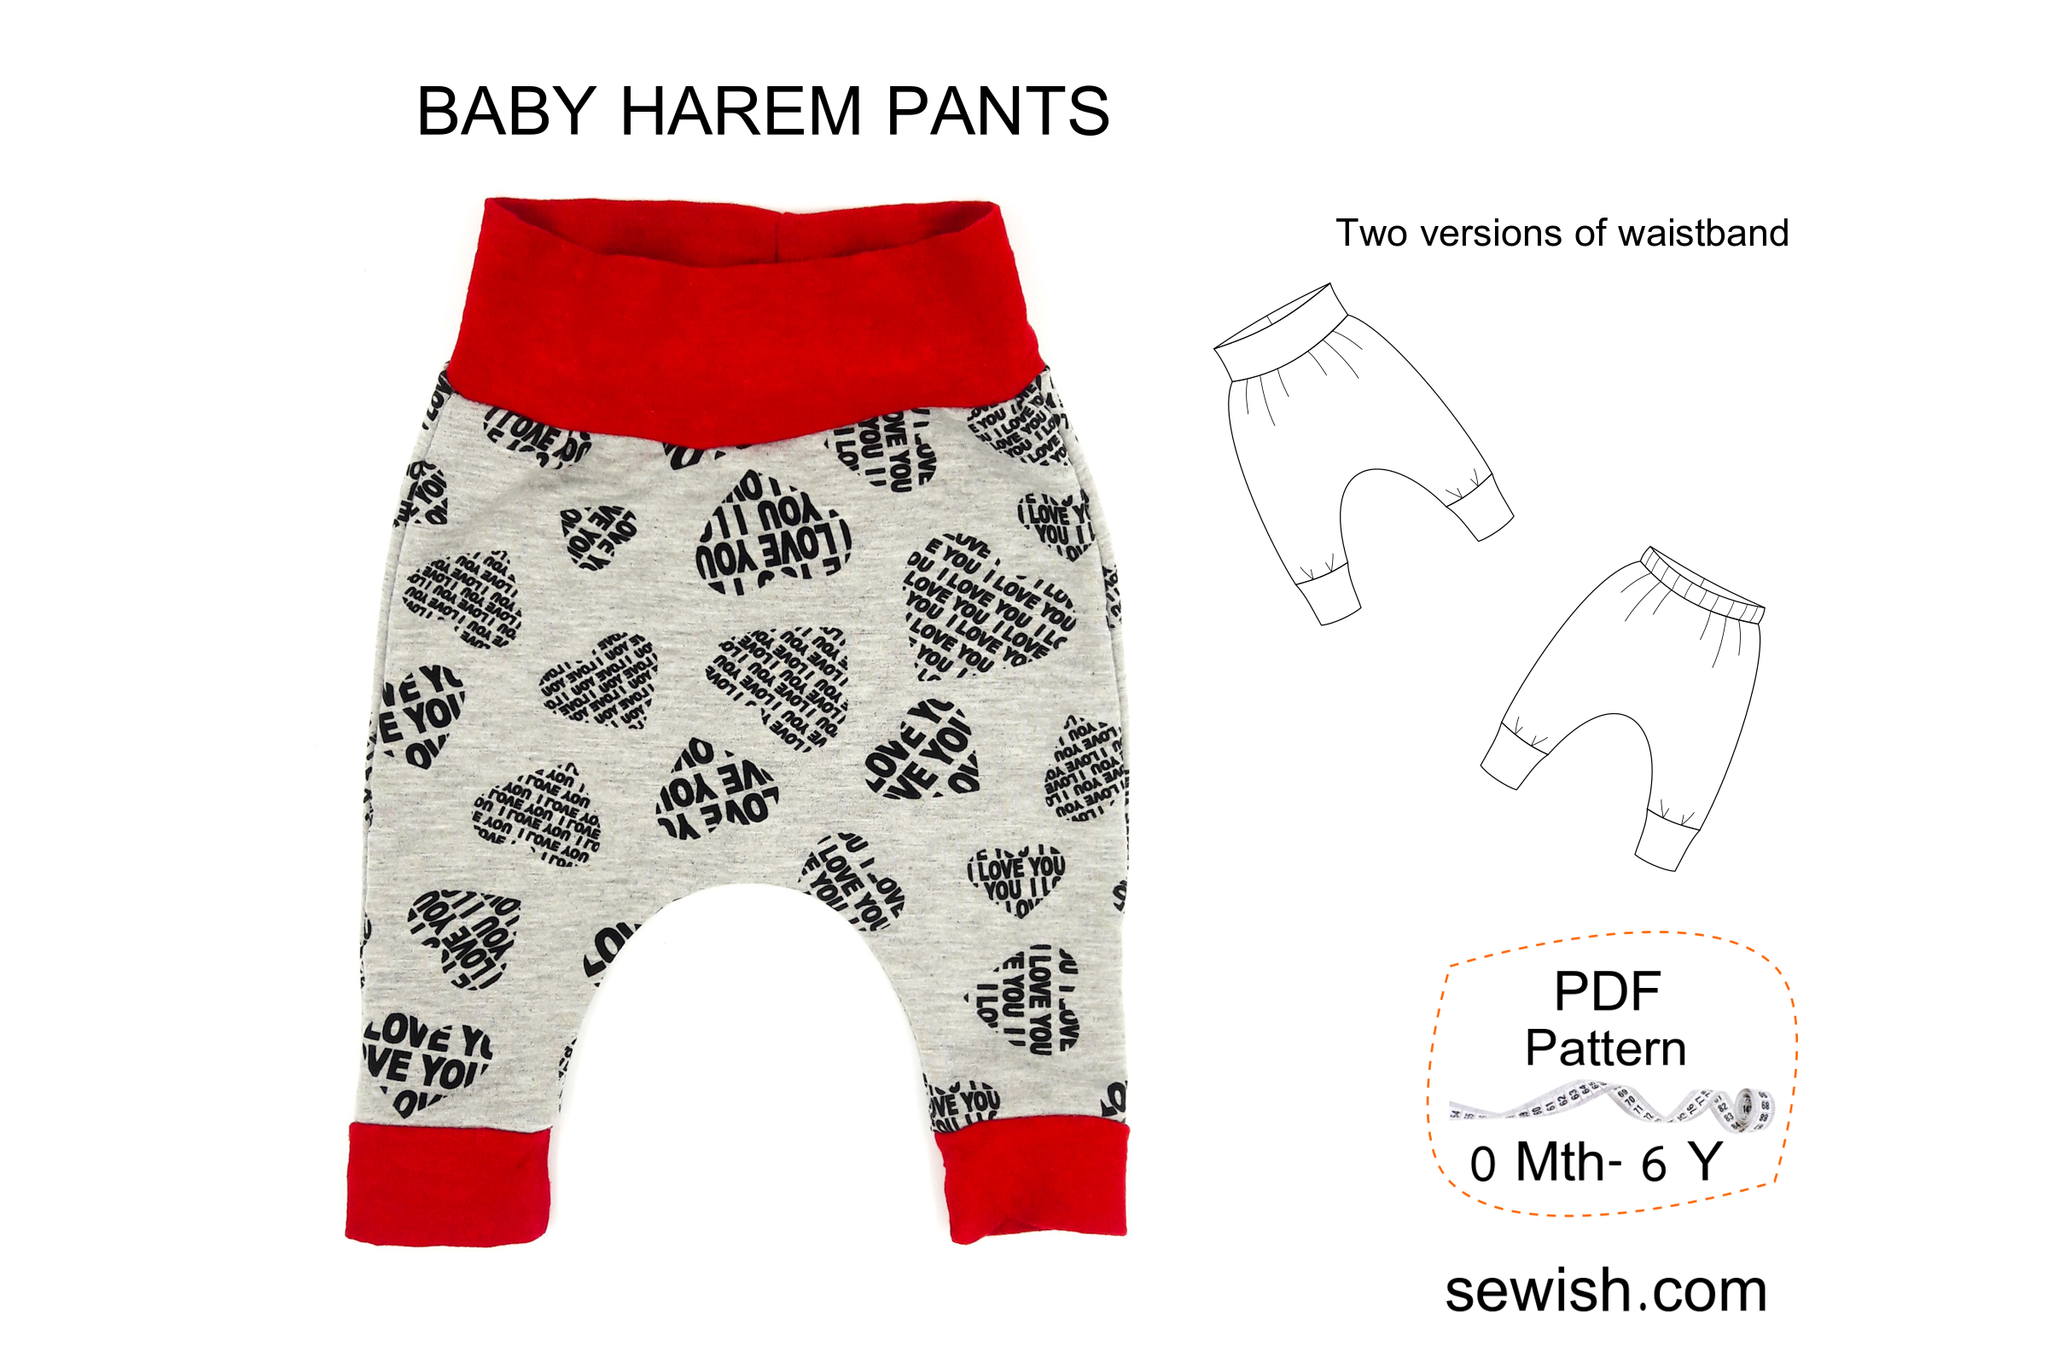 Pin by Jo-Ann Govender on sewing | Harem pants diy, Harem pants pattern,  Pants sewing pattern